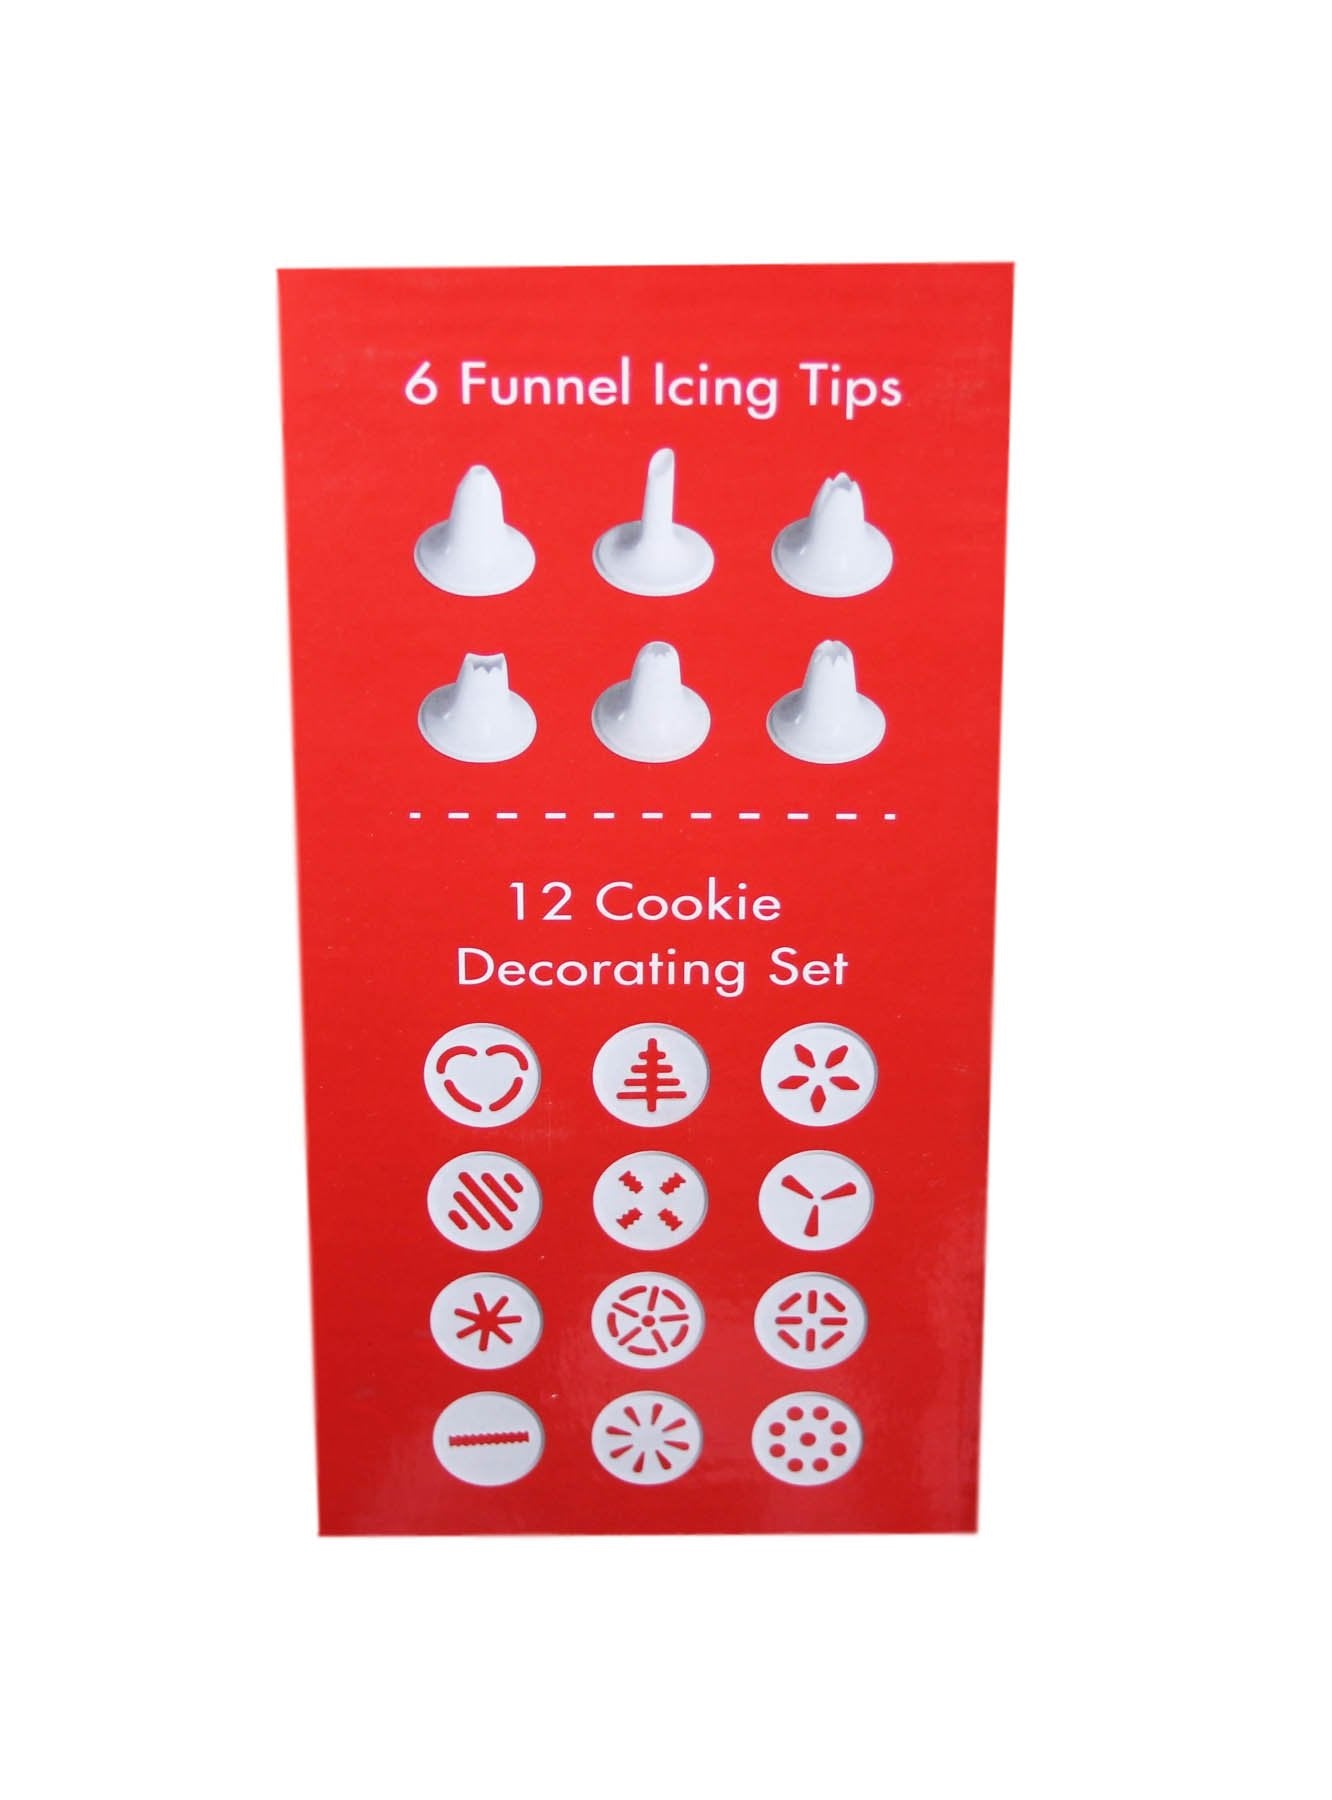 Cookie Press and Cake Decorator Set, 12 Cookie Decor Set, 6 Icing Funnels 4160 (Parcel Rate)